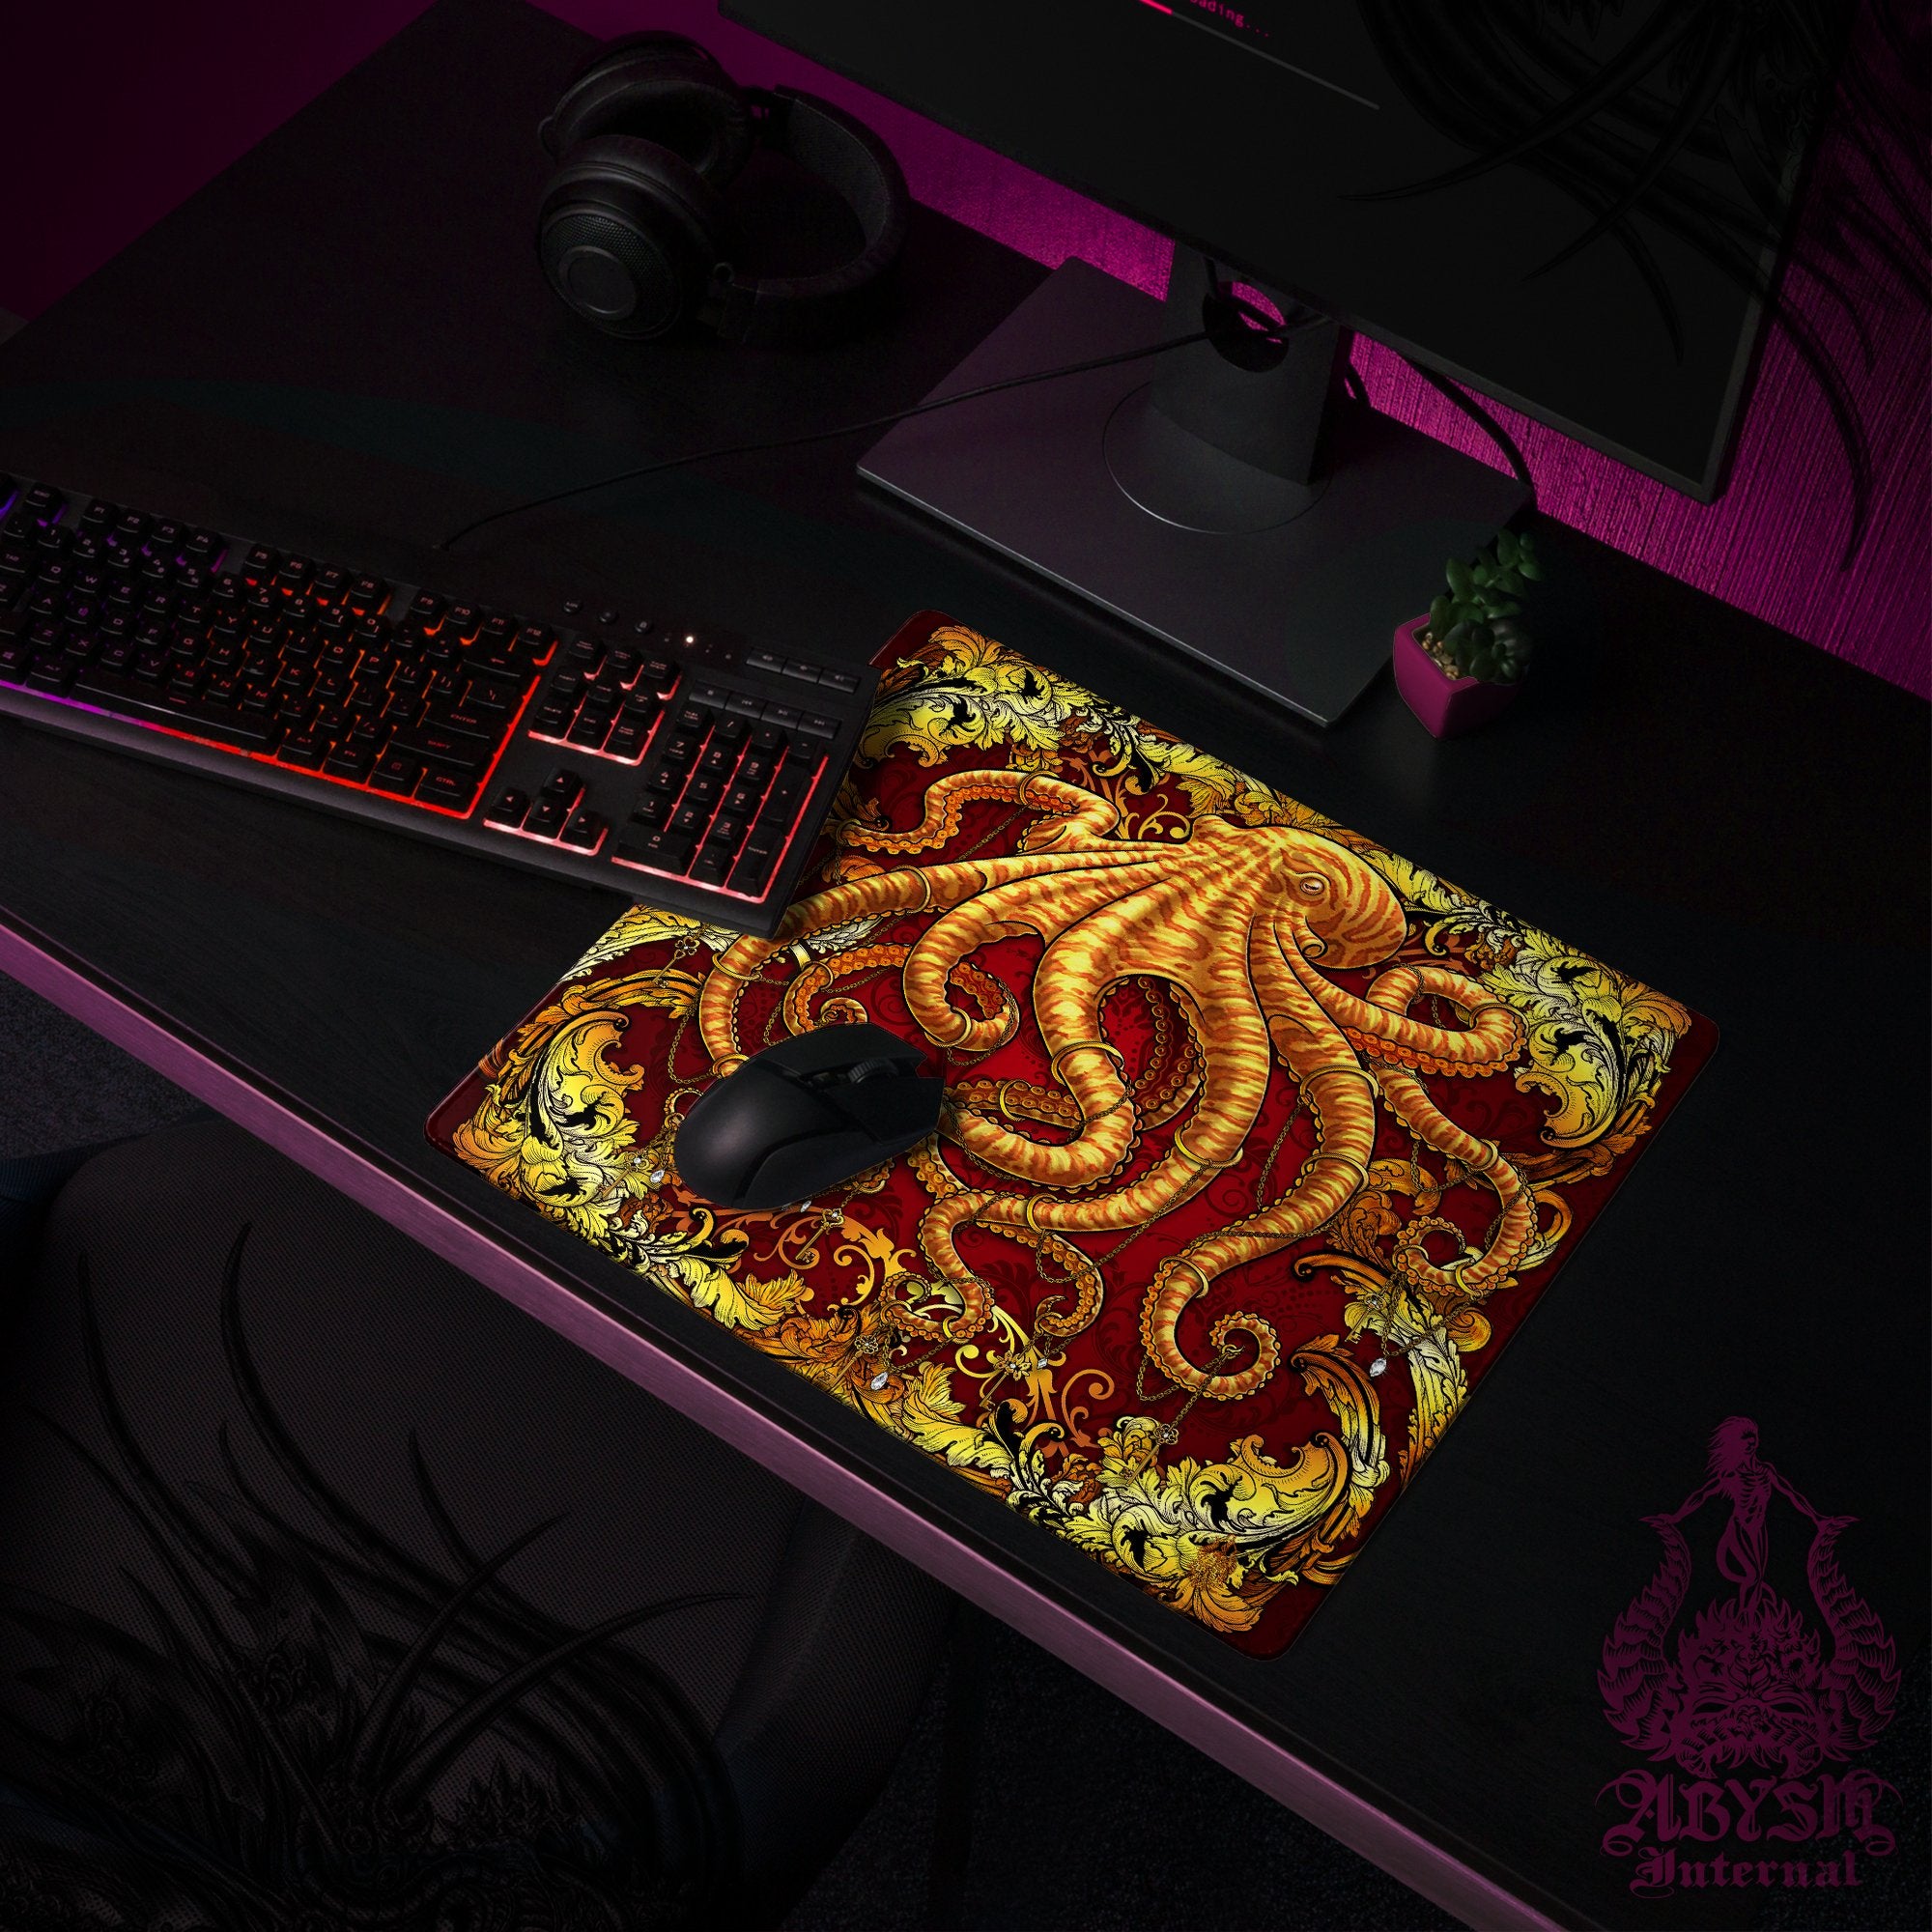 Gold Octopus Mouse Pad, Tentacles Gaming Desk Mat, Baroque Workpad, Gamer Table Protector Cover, Fantasy Art Print - 2 Colors - Abysm Internal